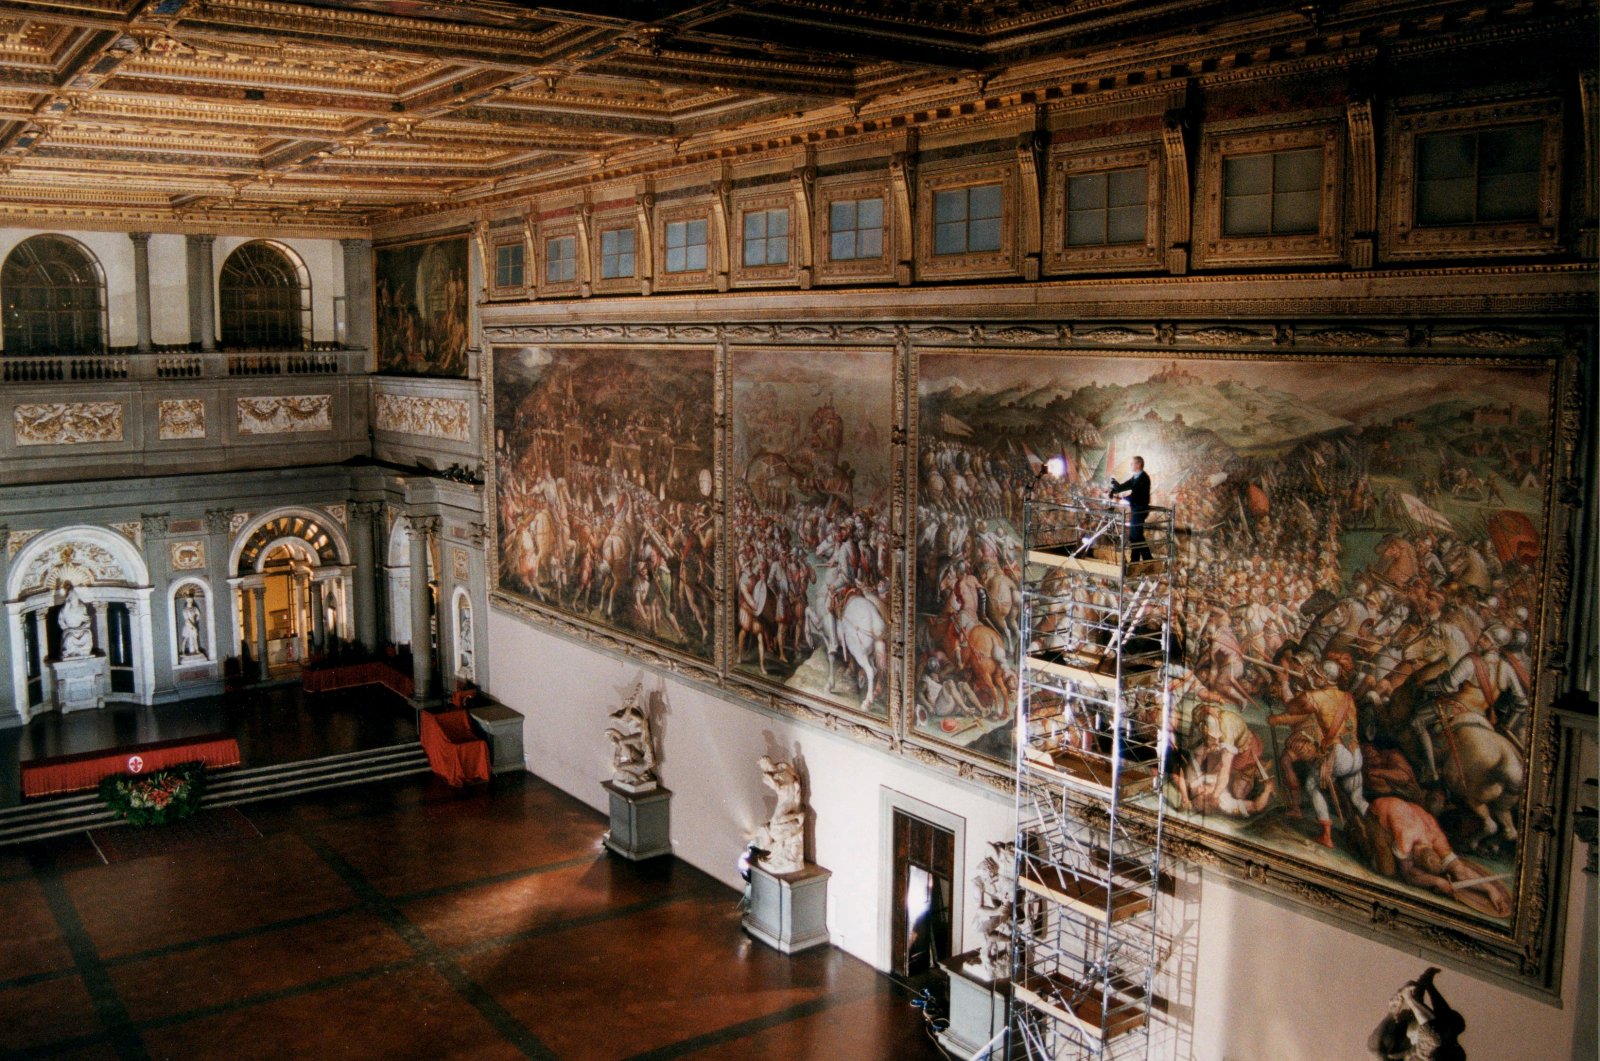 In front of Giorgio Vasari's fresco "The Battle of Marciano," which hangs in the Palazzo Vecchio, Italian art expert Maurizio Seracini used radar and X-ray to detect "The Battle of Anghiari," hidden behind this fresco, on Nov. 19, 2009. (REUTERS PHOTO)